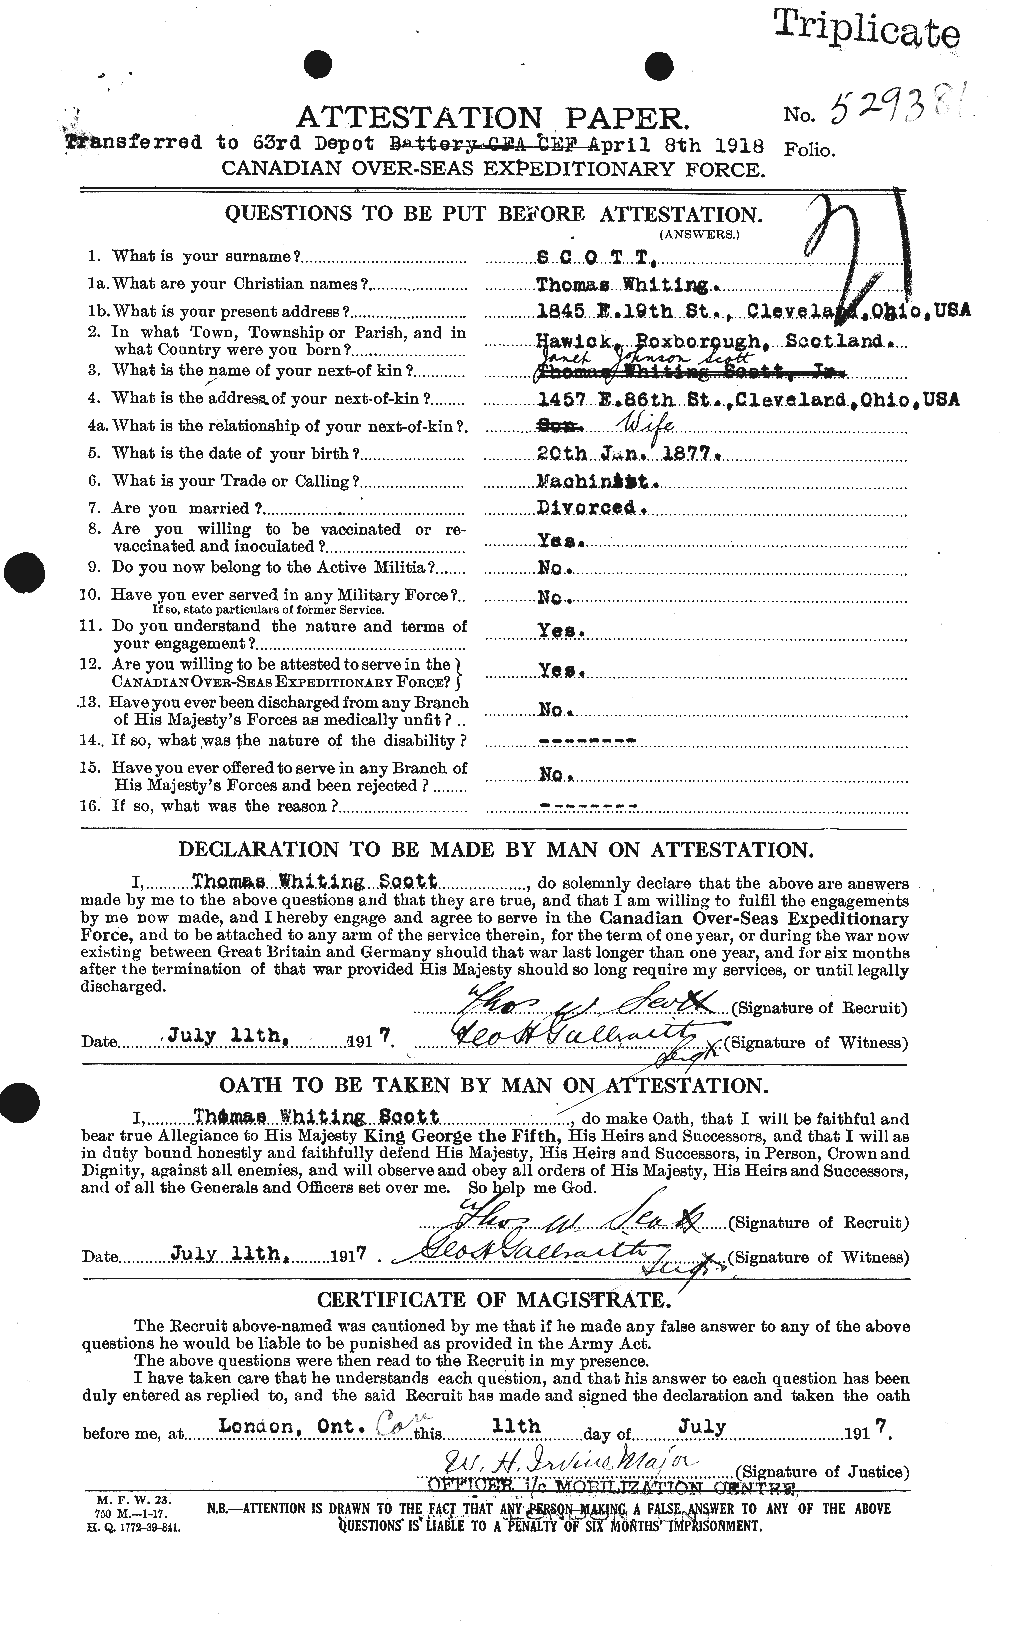 Personnel Records of the First World War - CEF 088216a